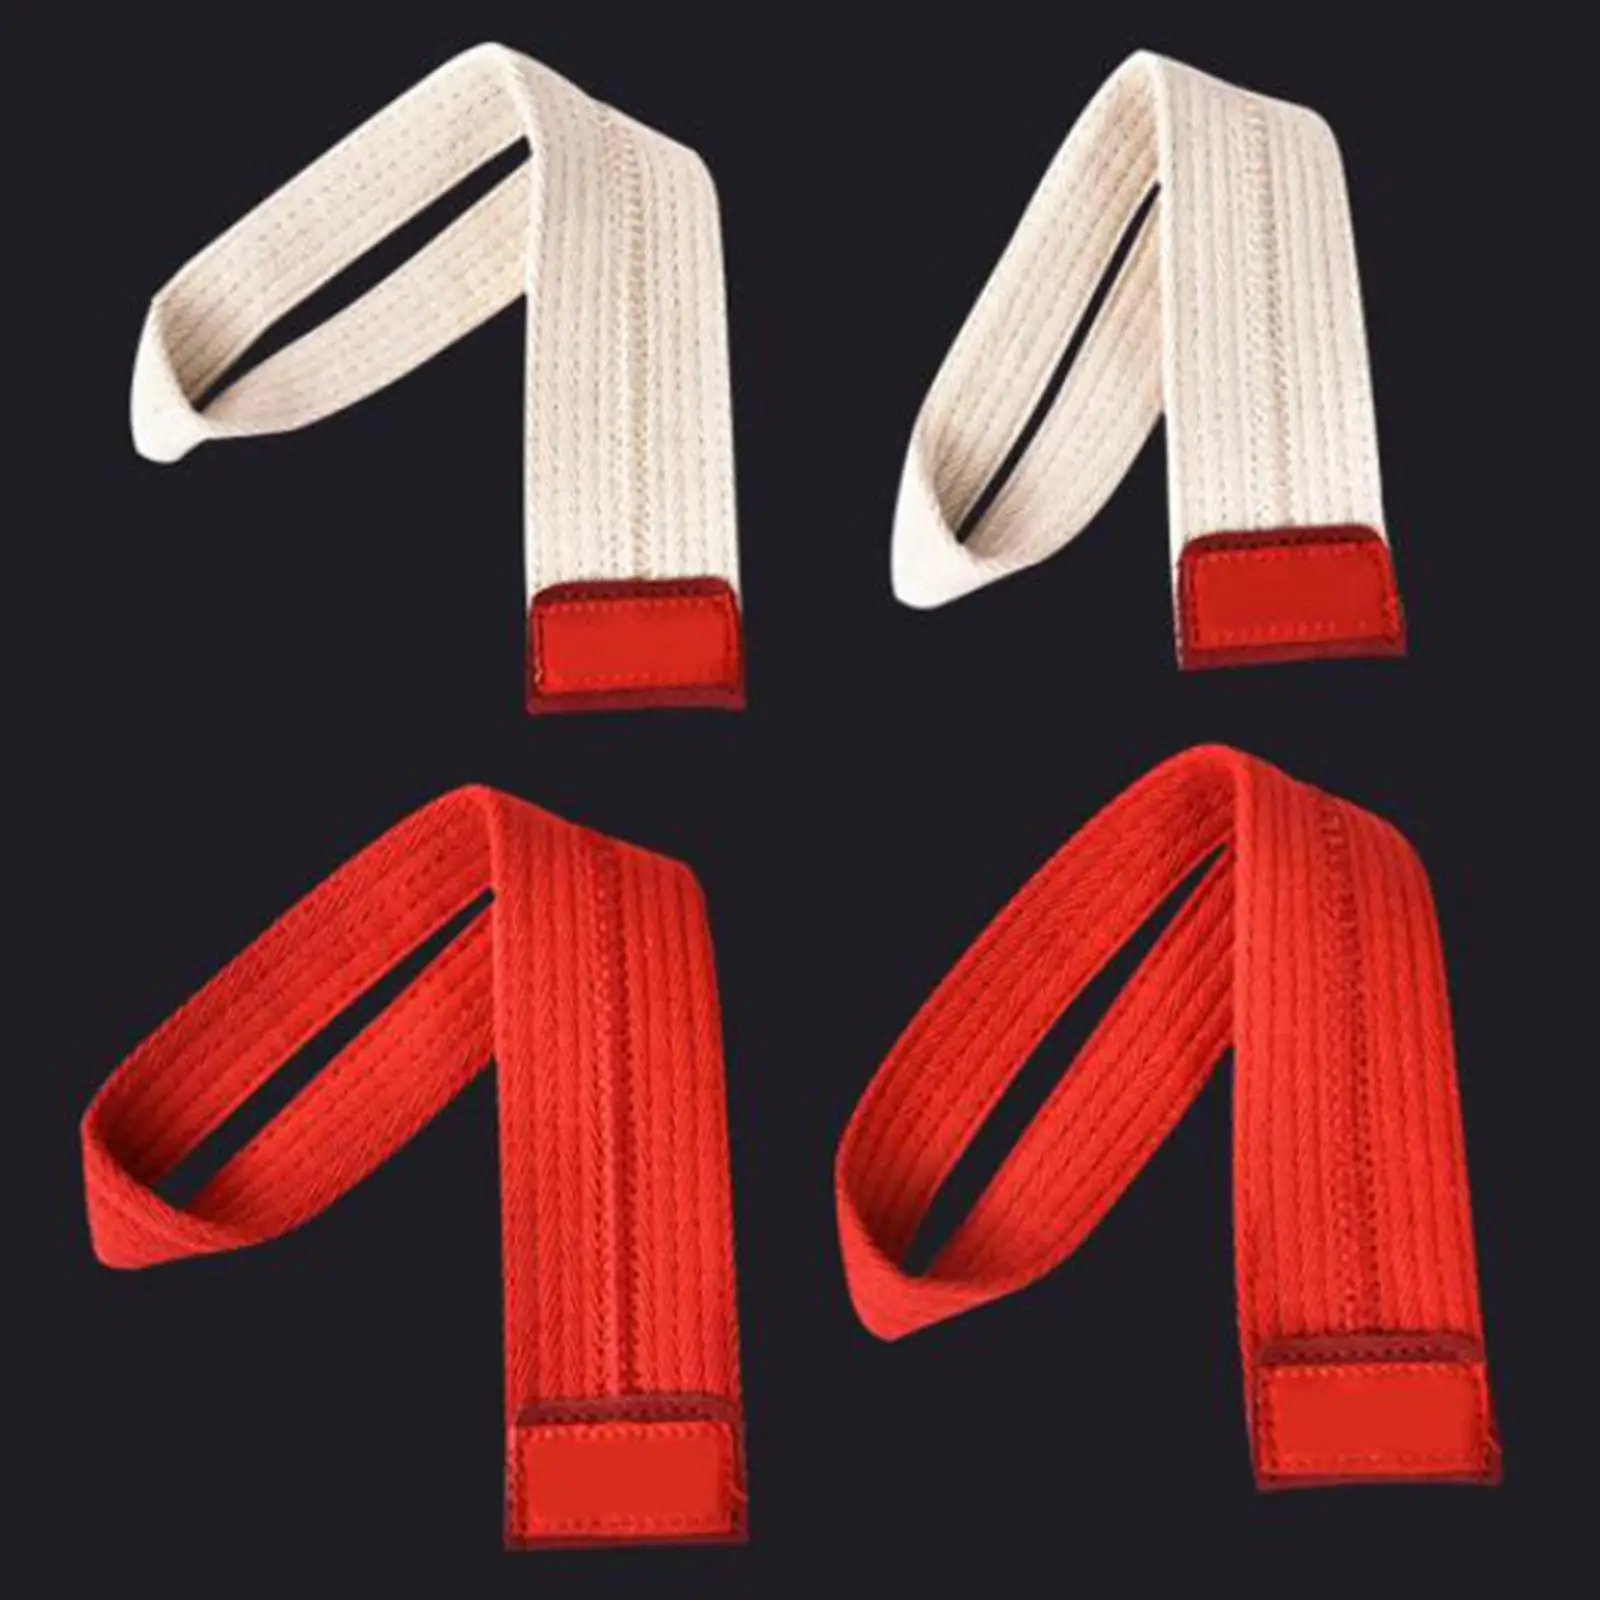 2Pcs Weight Lifting Straps Wrist Straps for Weightlifting Powerlifting Gym Exercise Pull up Dumbbell Wrist Wraps Equipment